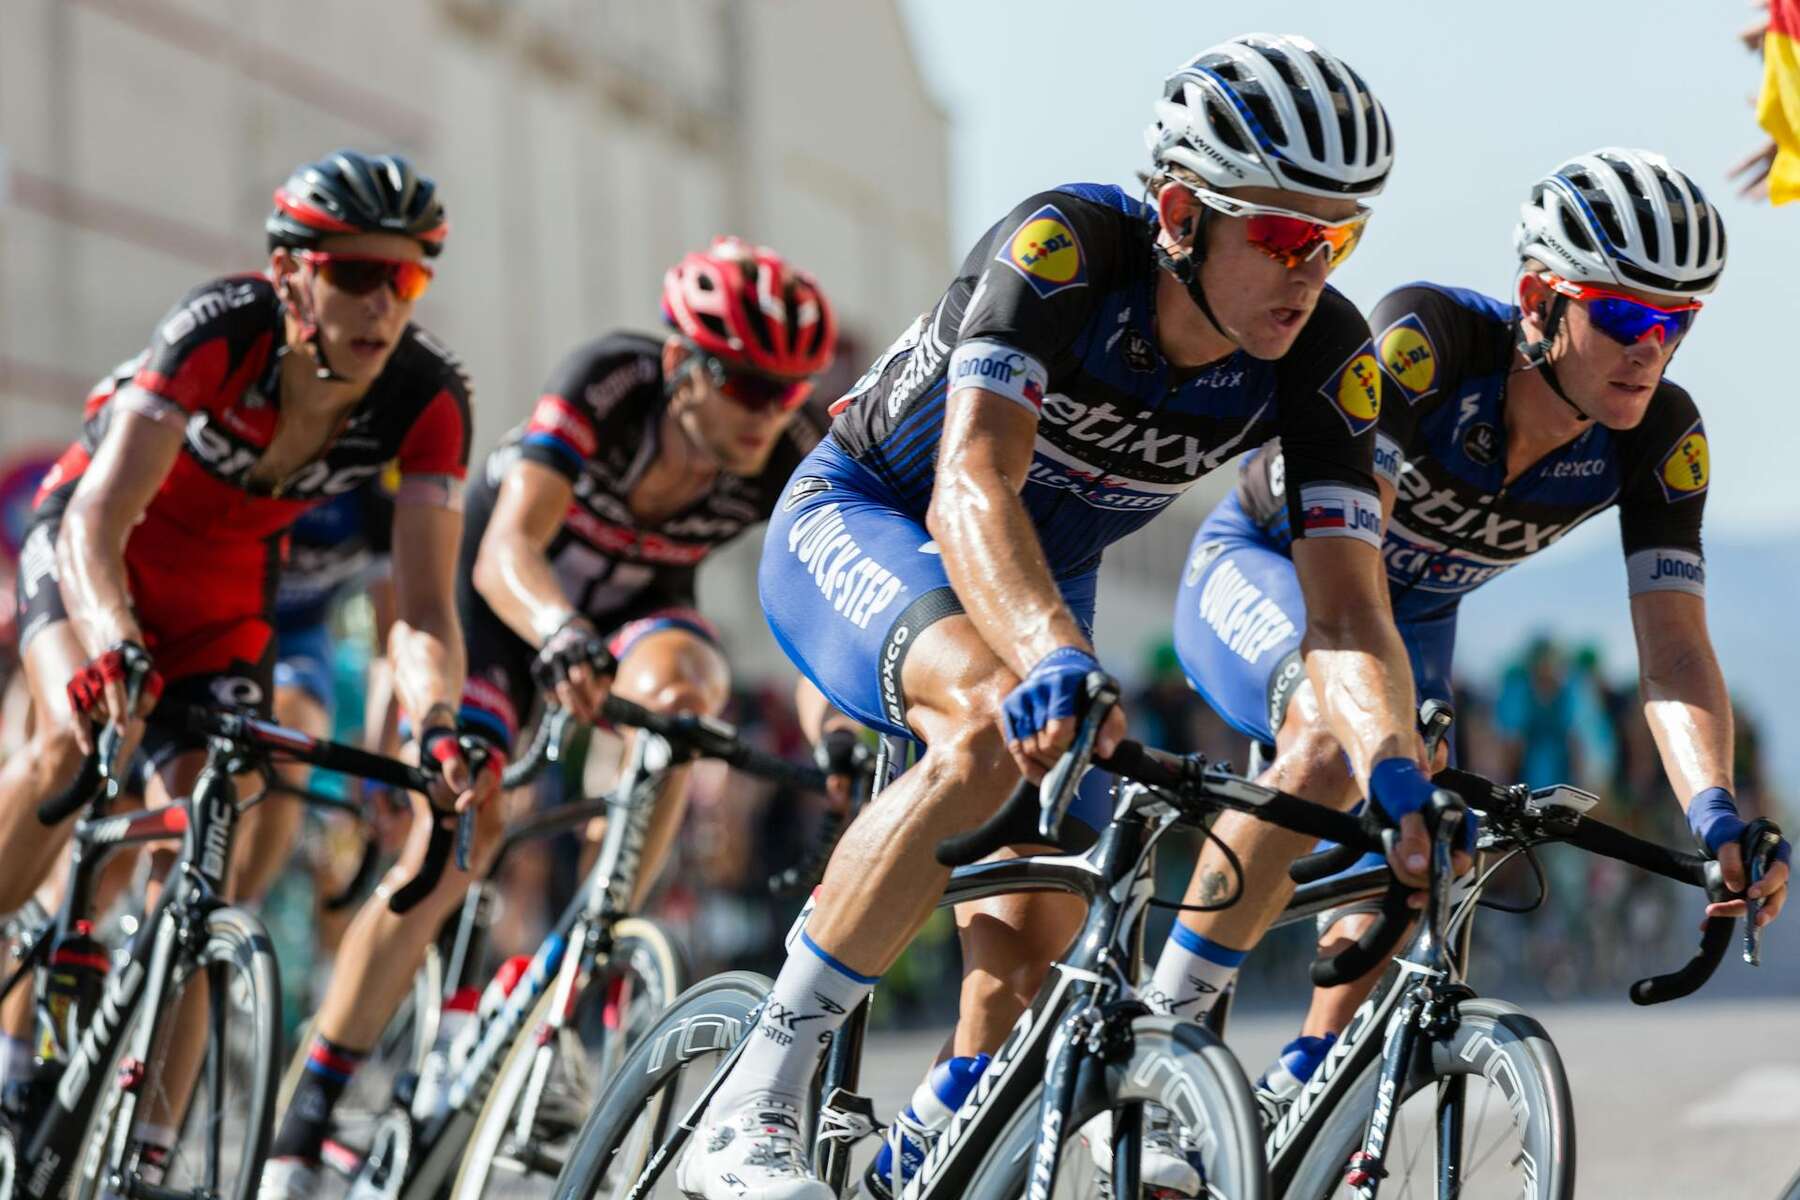 Several cyclists racing in a competitive race